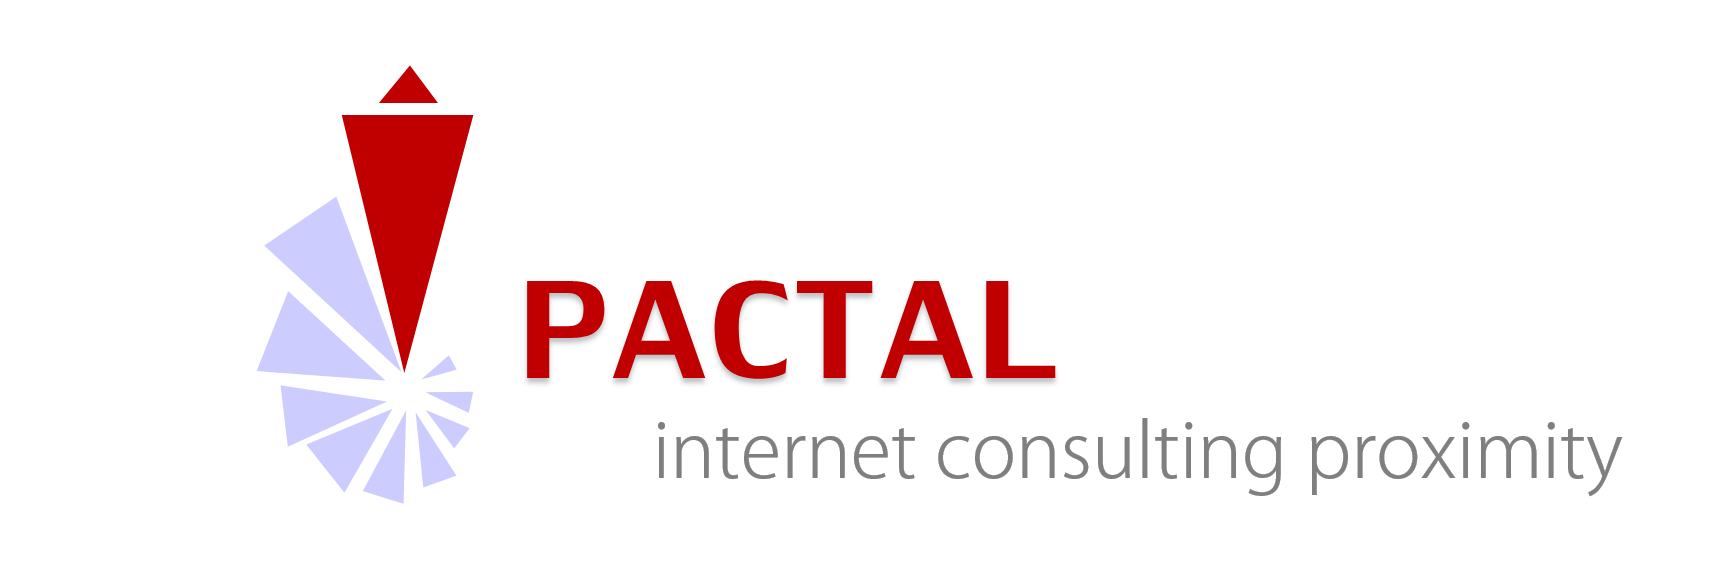 Pactal internet consulting proximity